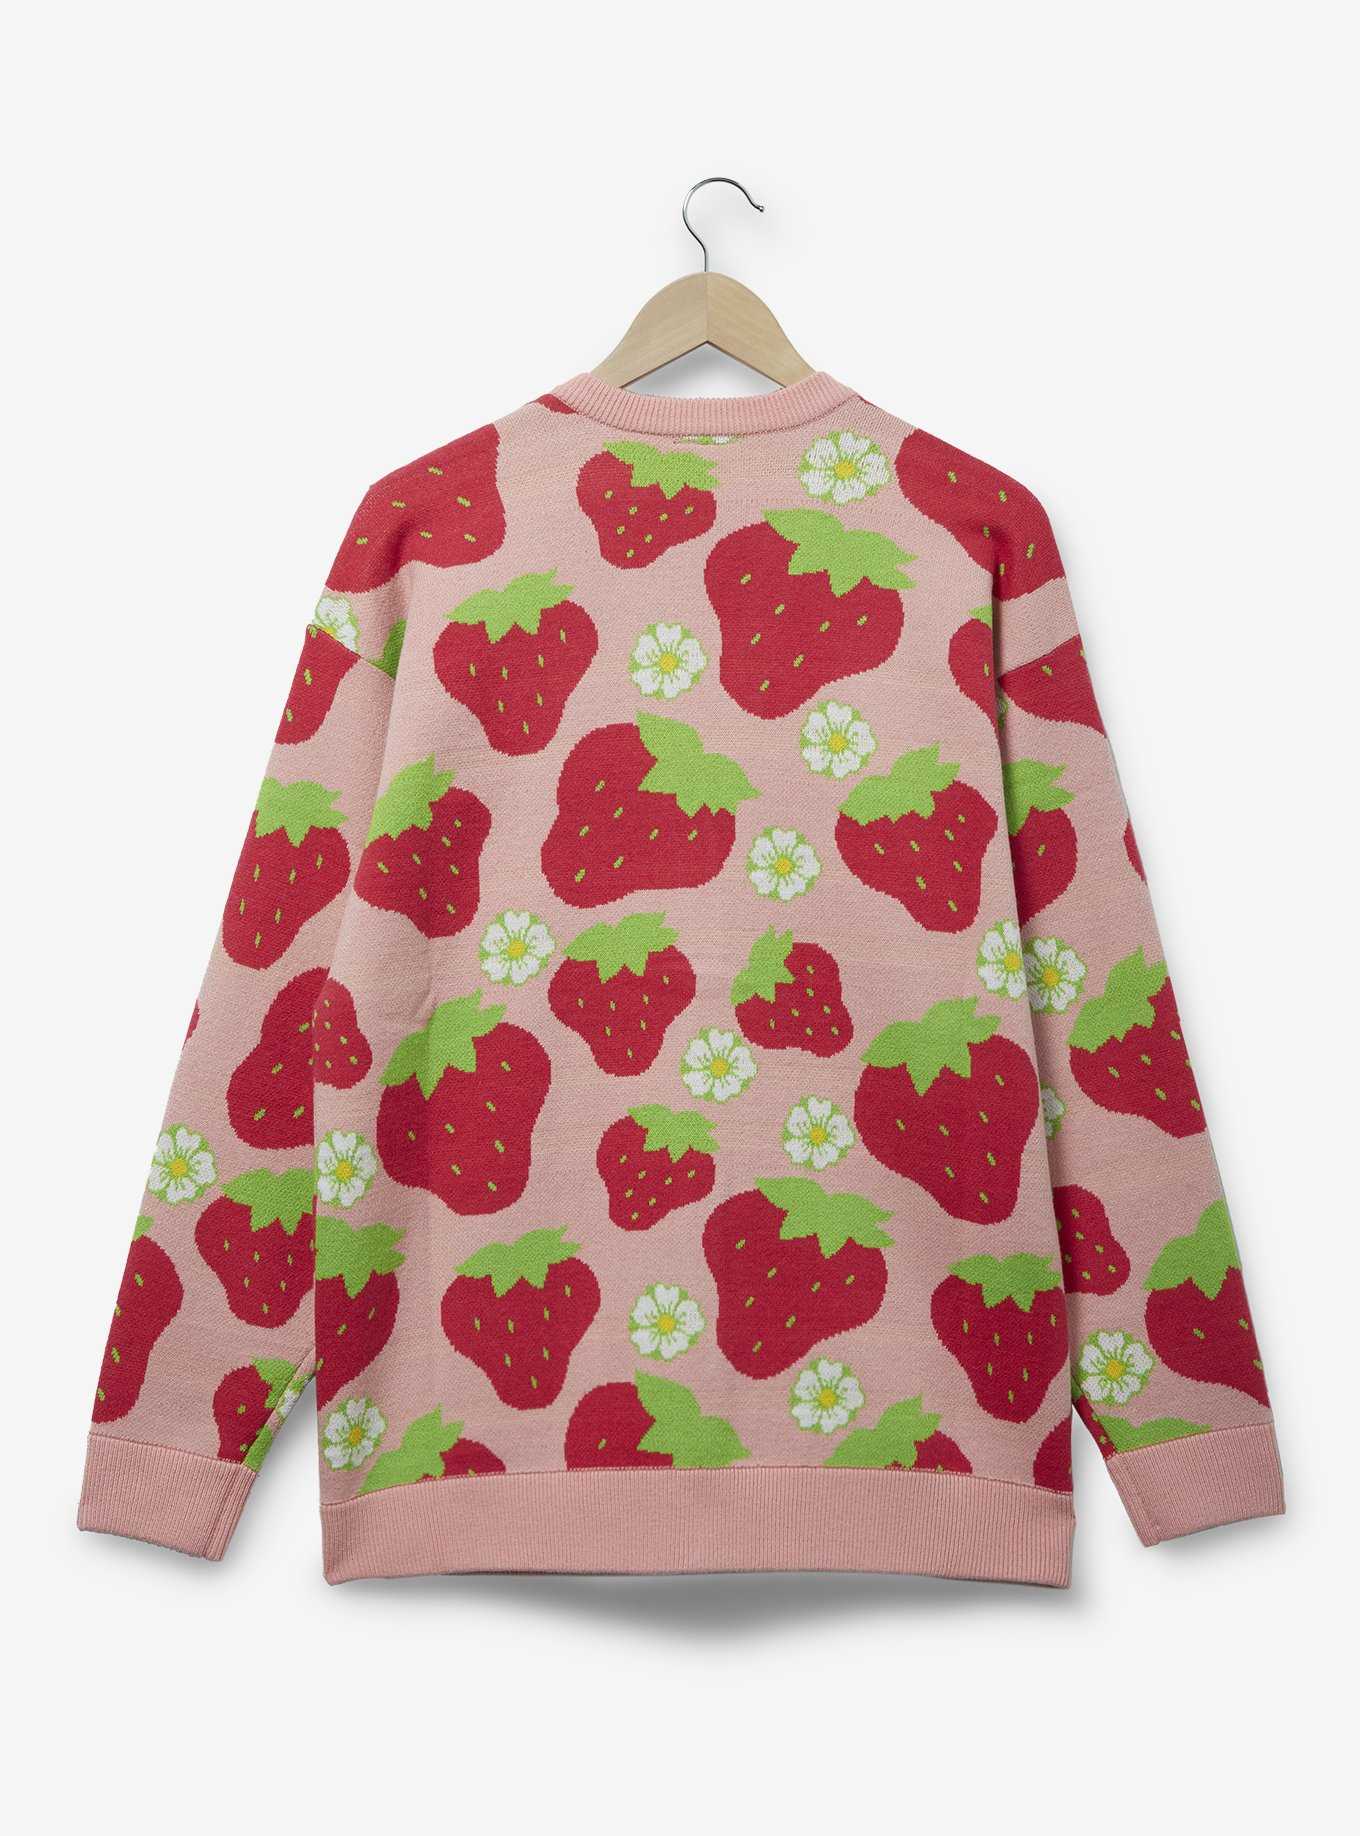 Strawberry Shortcake Allover Strawberry Print Women's Cardigan - BoxLunch Exclusive, , hi-res